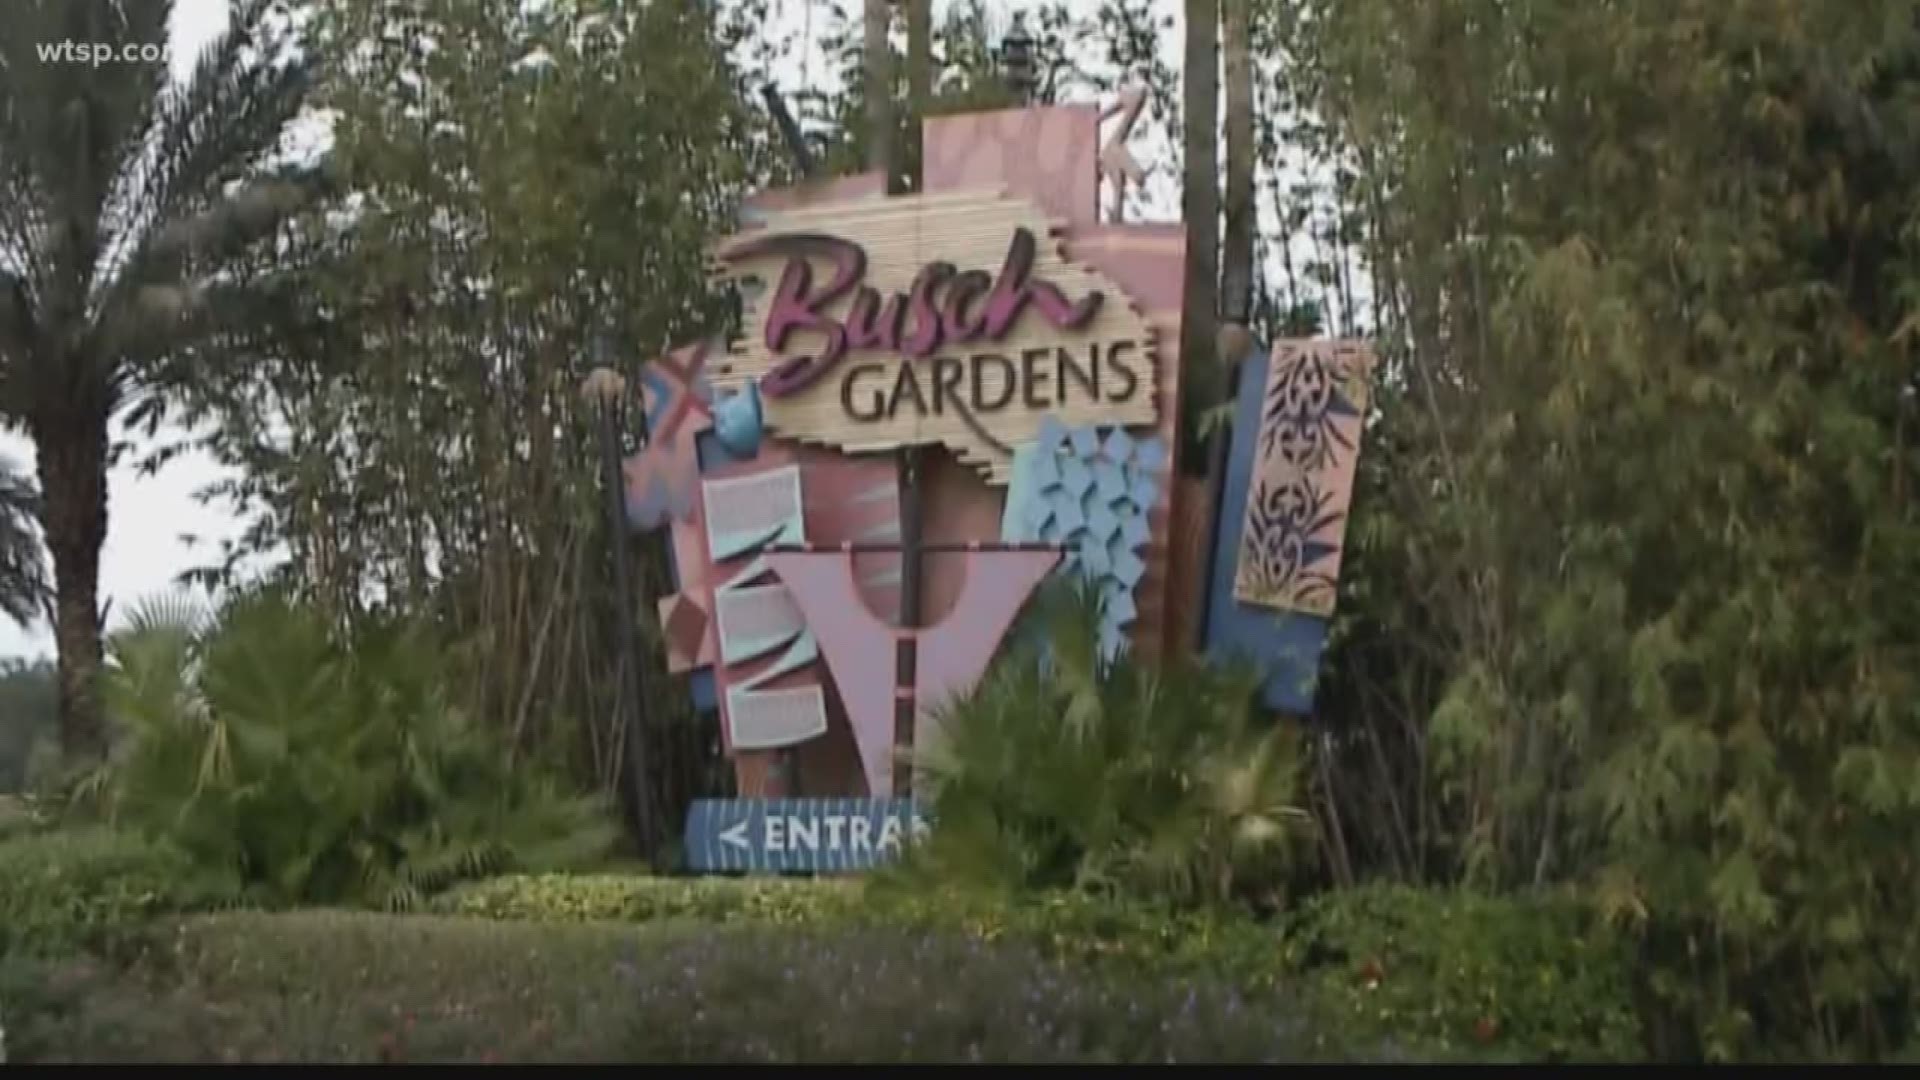 Busch Gardens kicks off is 60th anniversary and celebrations Friday with the launch of its new pin trading program, a performance by the Florida Orchestra and a fireworks show. https://on.wtsp.com/2IFYF0R